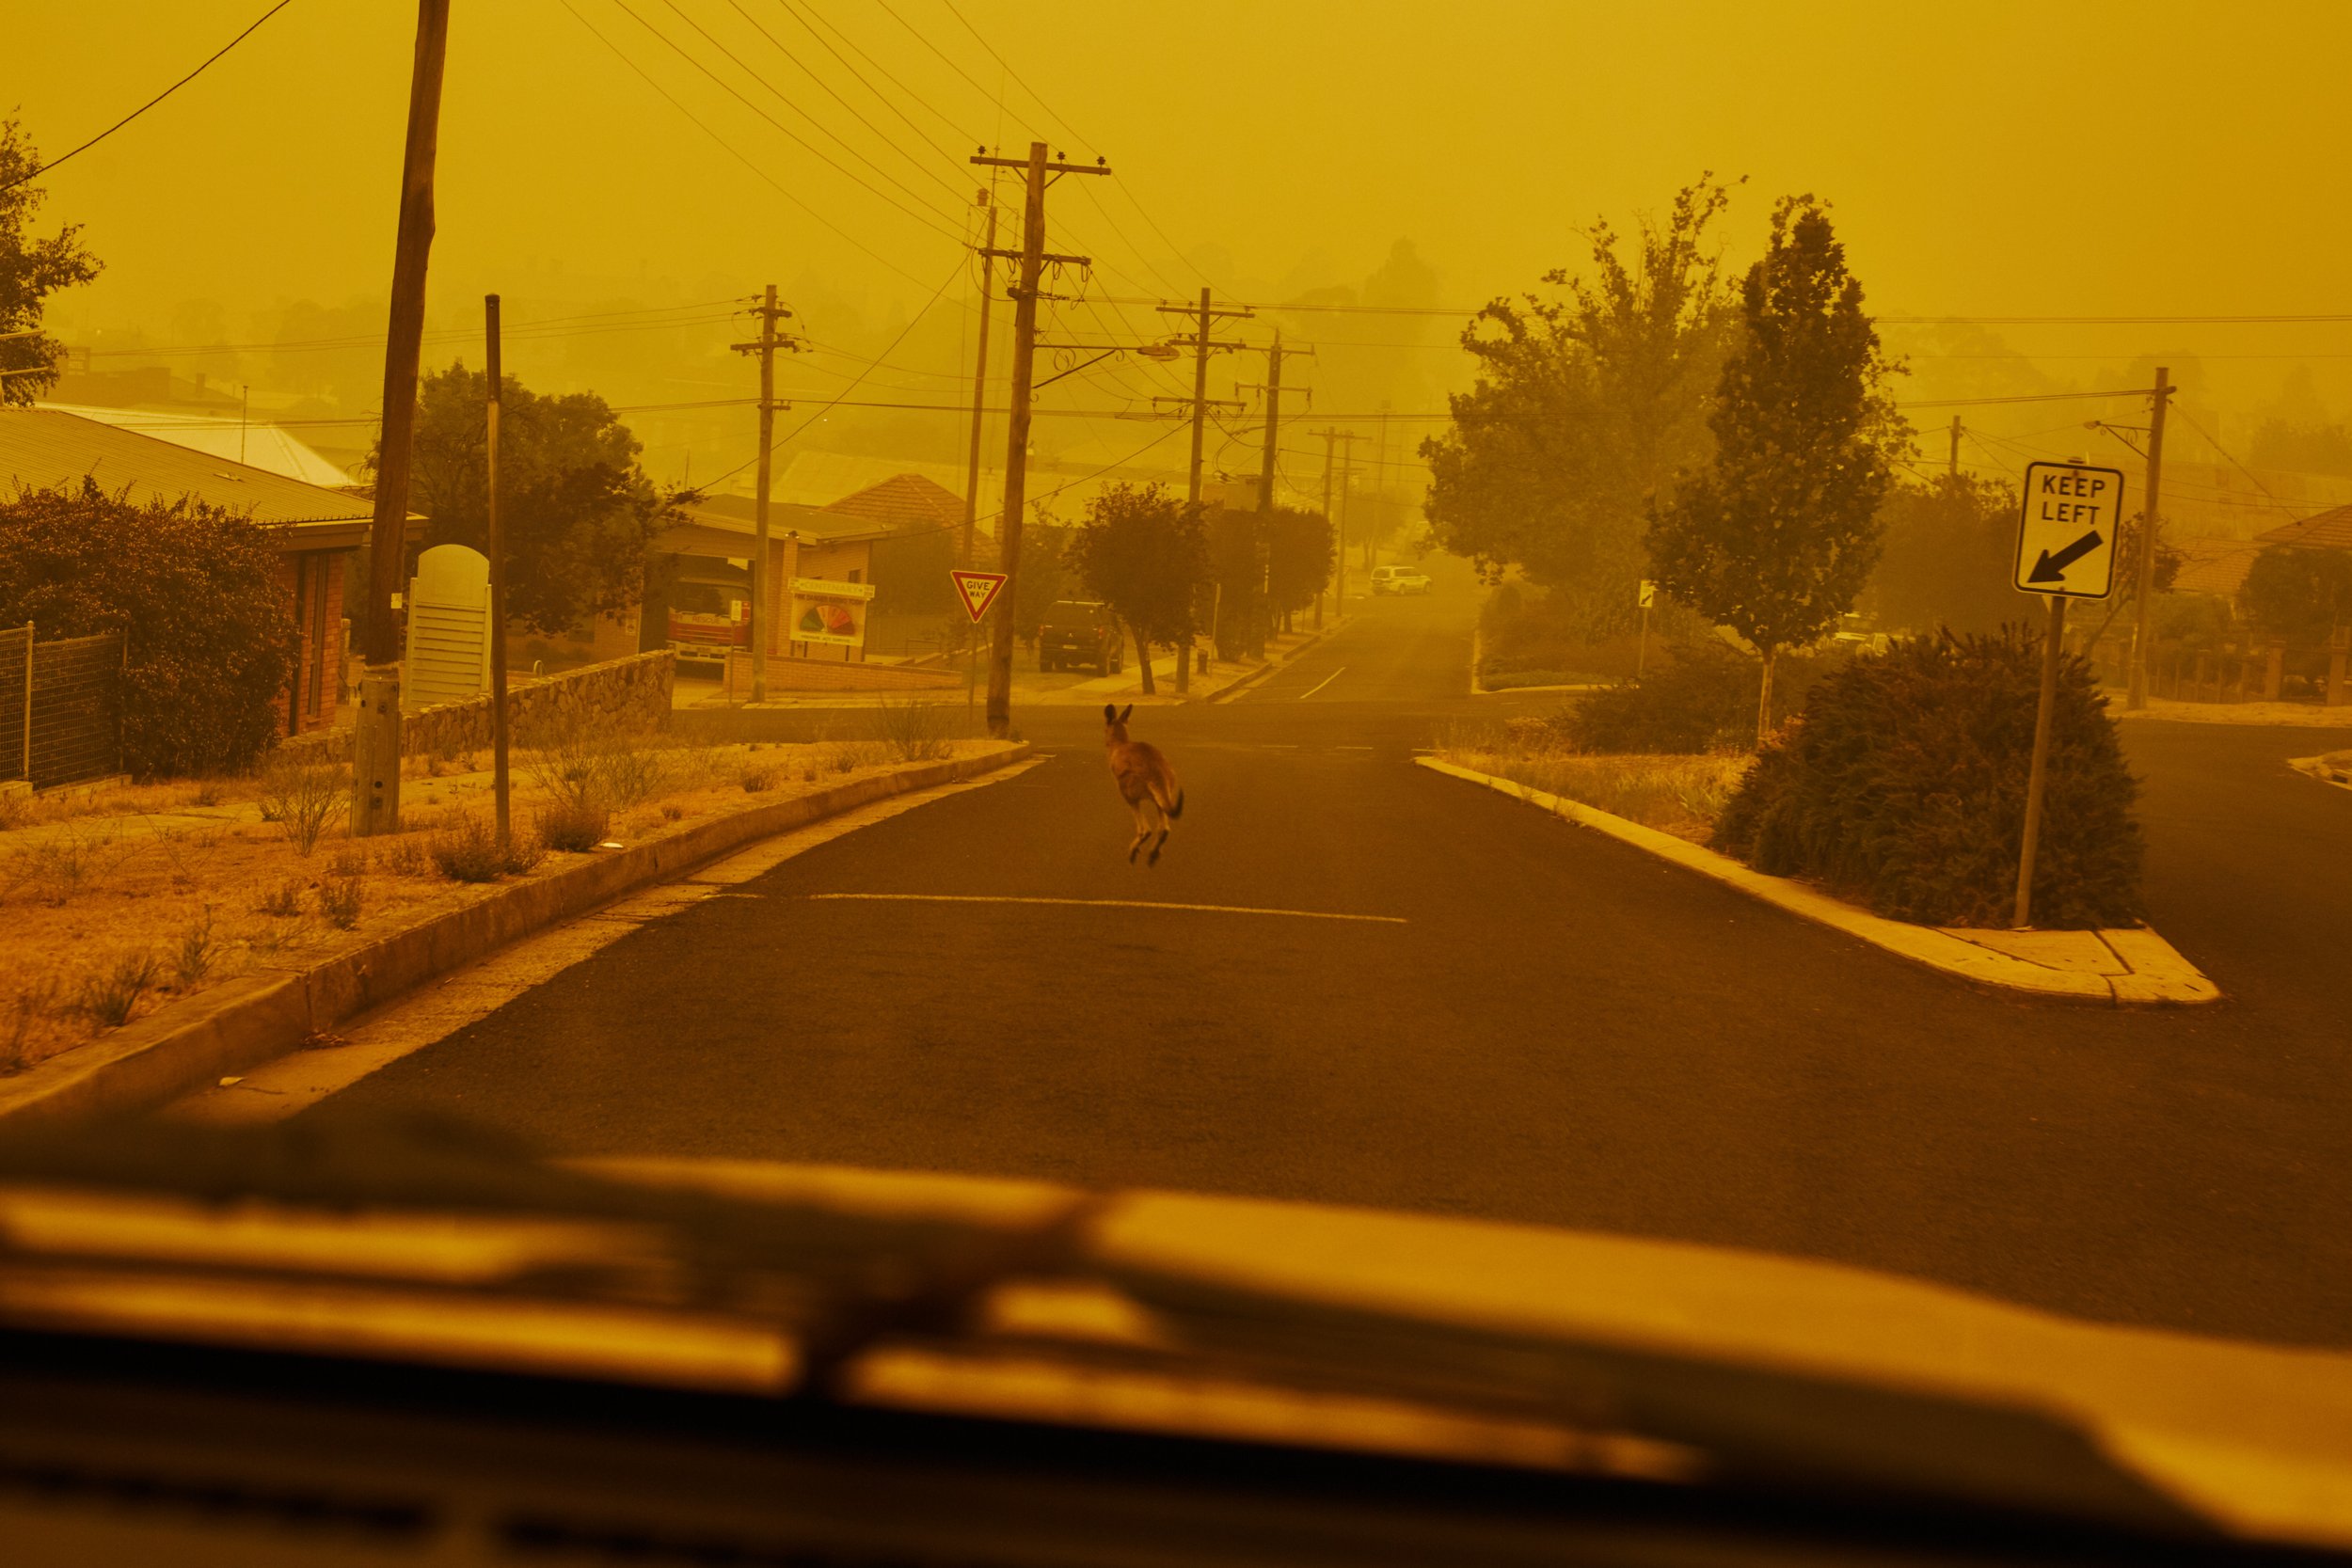  Black Summer bushfires, 2019  Wildlife sought refuge in the relative safety of towns.   Cooma, NSW 